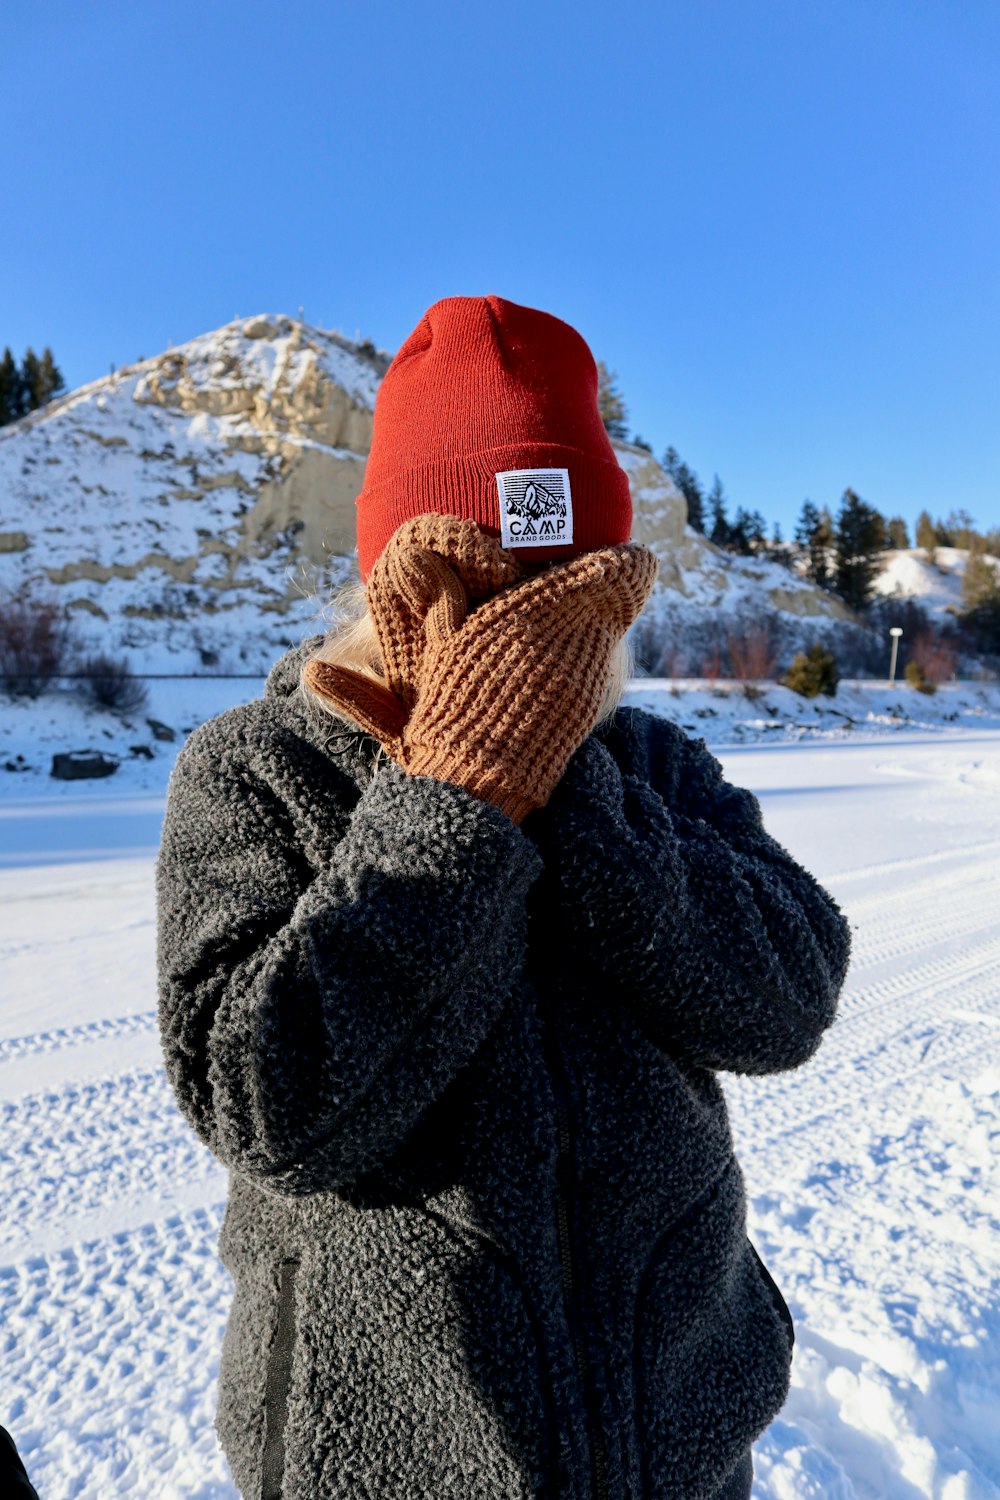 person in red bobble hat, gray sweater, and brown gloves covering face